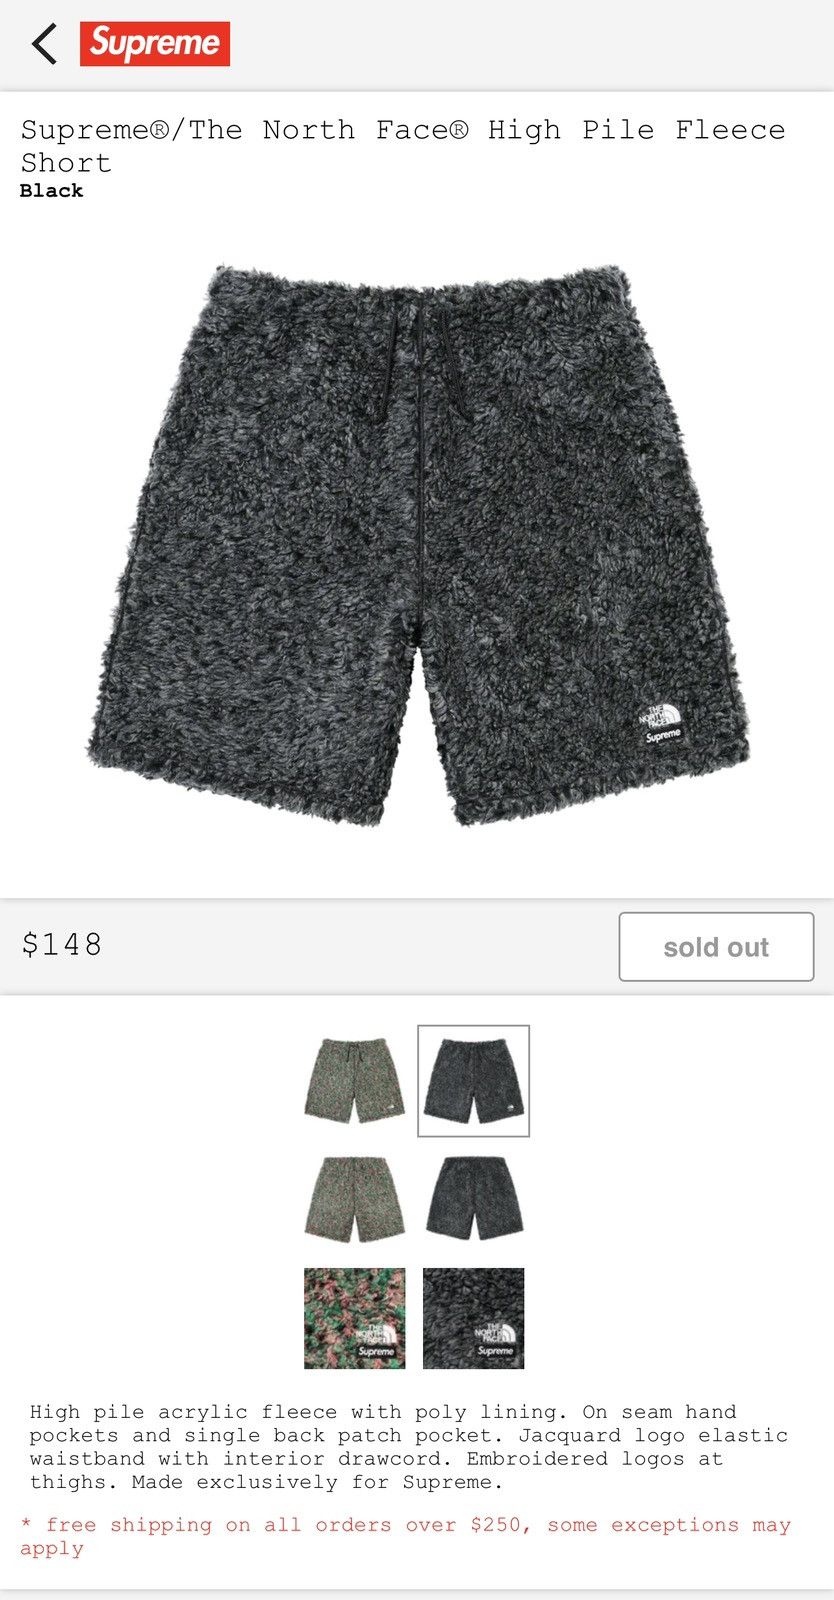 Supreme SS23 Supreme x The North Face High Pile Fleece Shorts